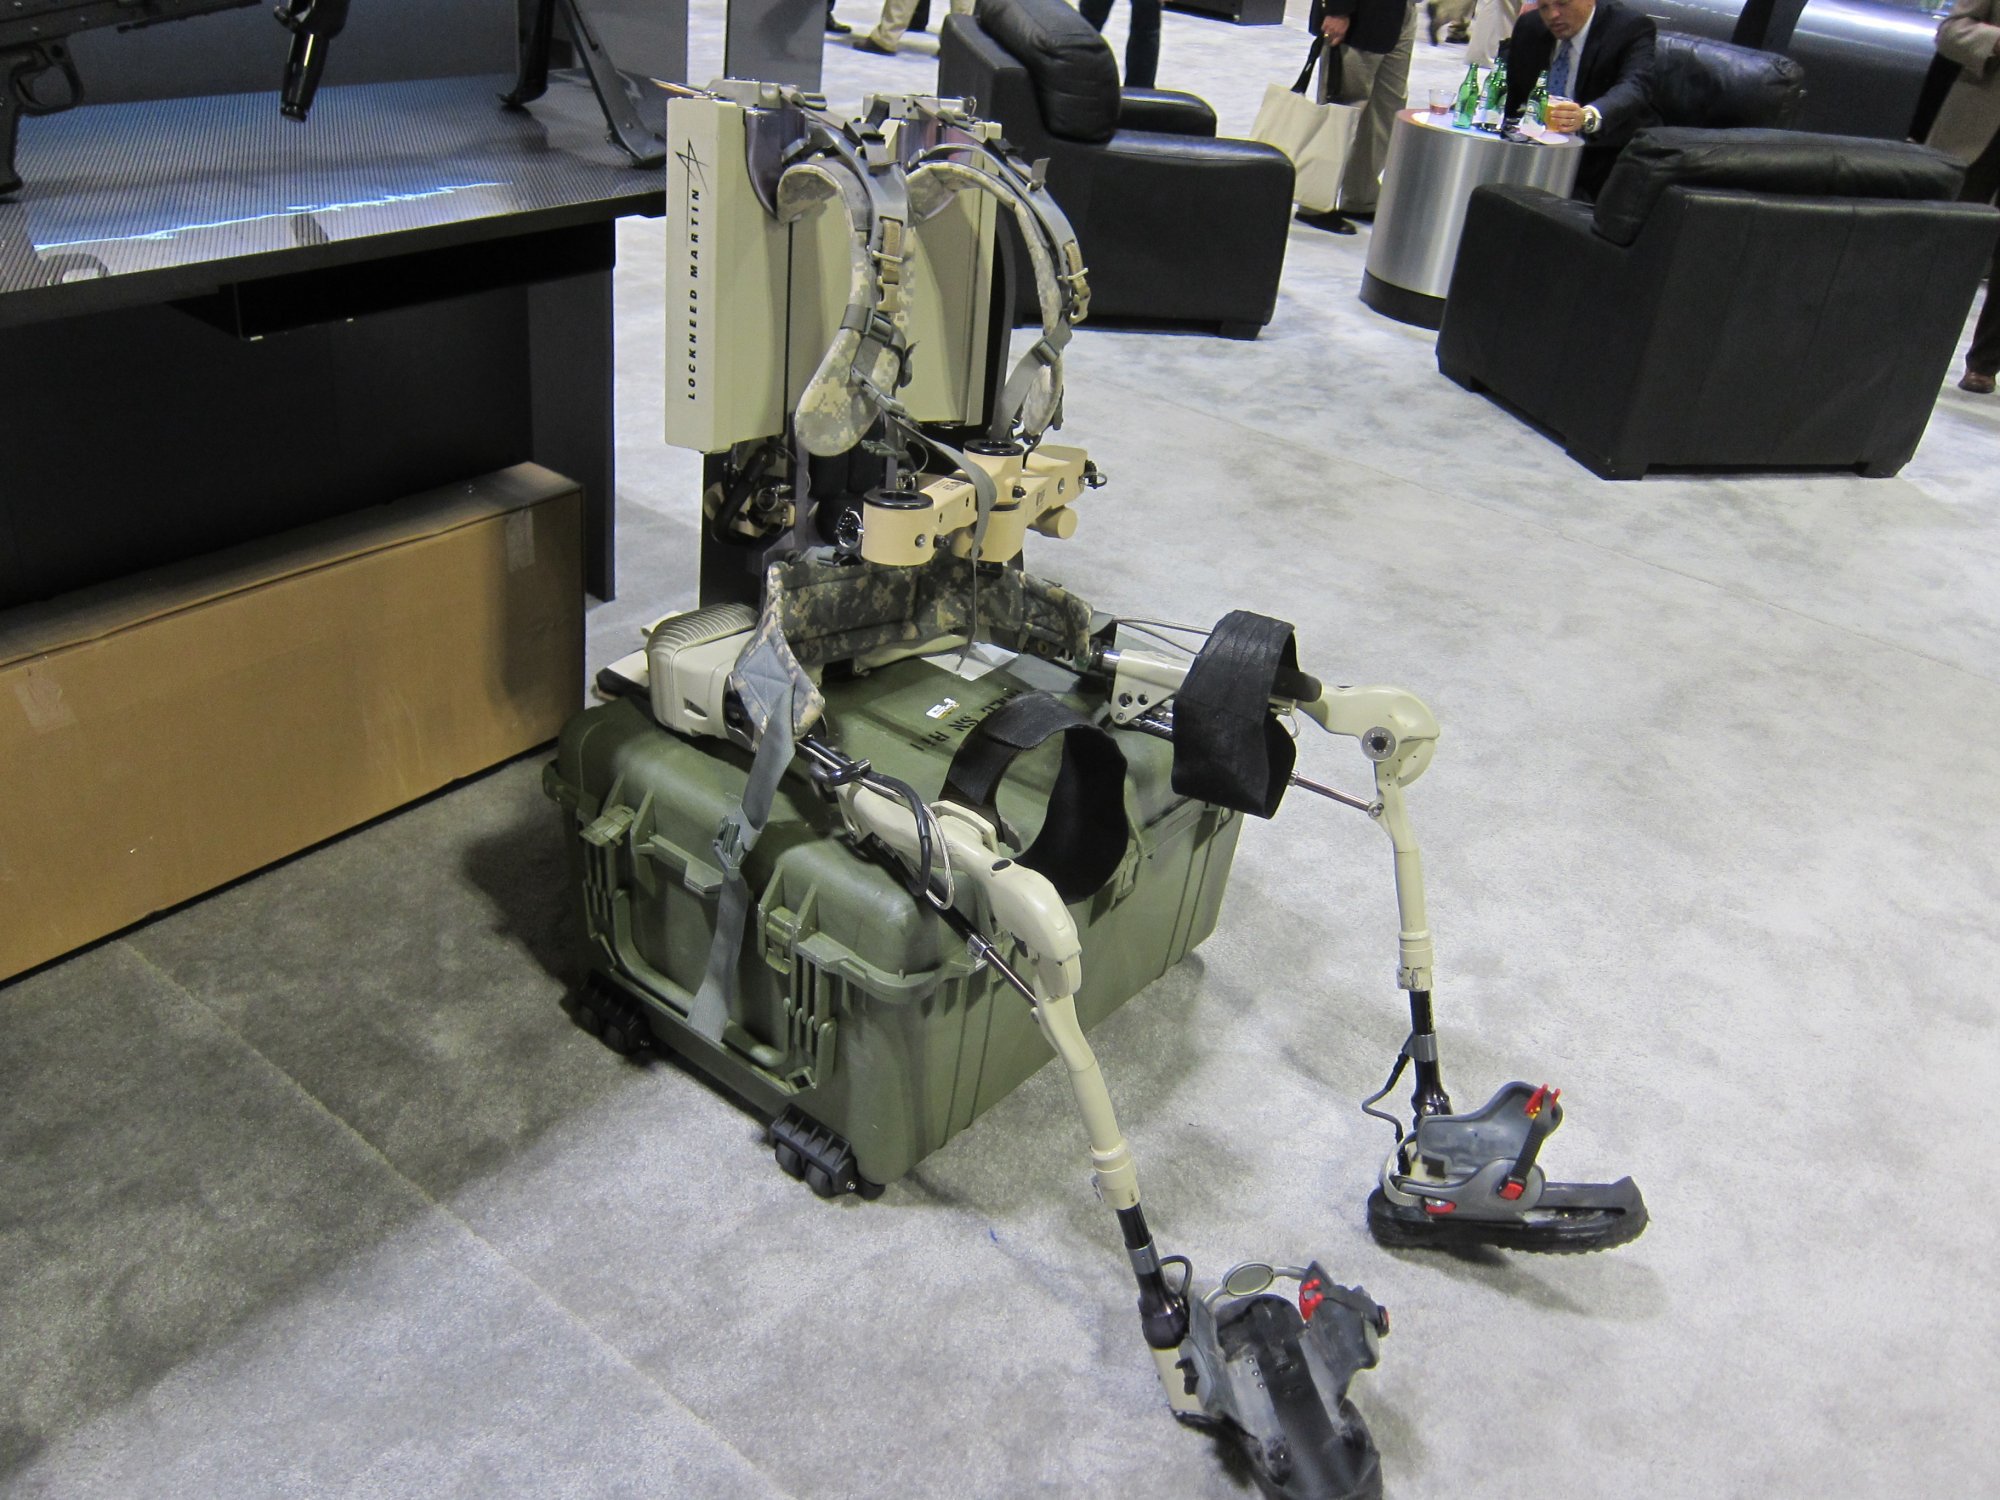 Lockheed's HULC Exoskeleton is Stealthy, Enables Soldiers to Easily Carry 200-Pounds for Over 12-Miles